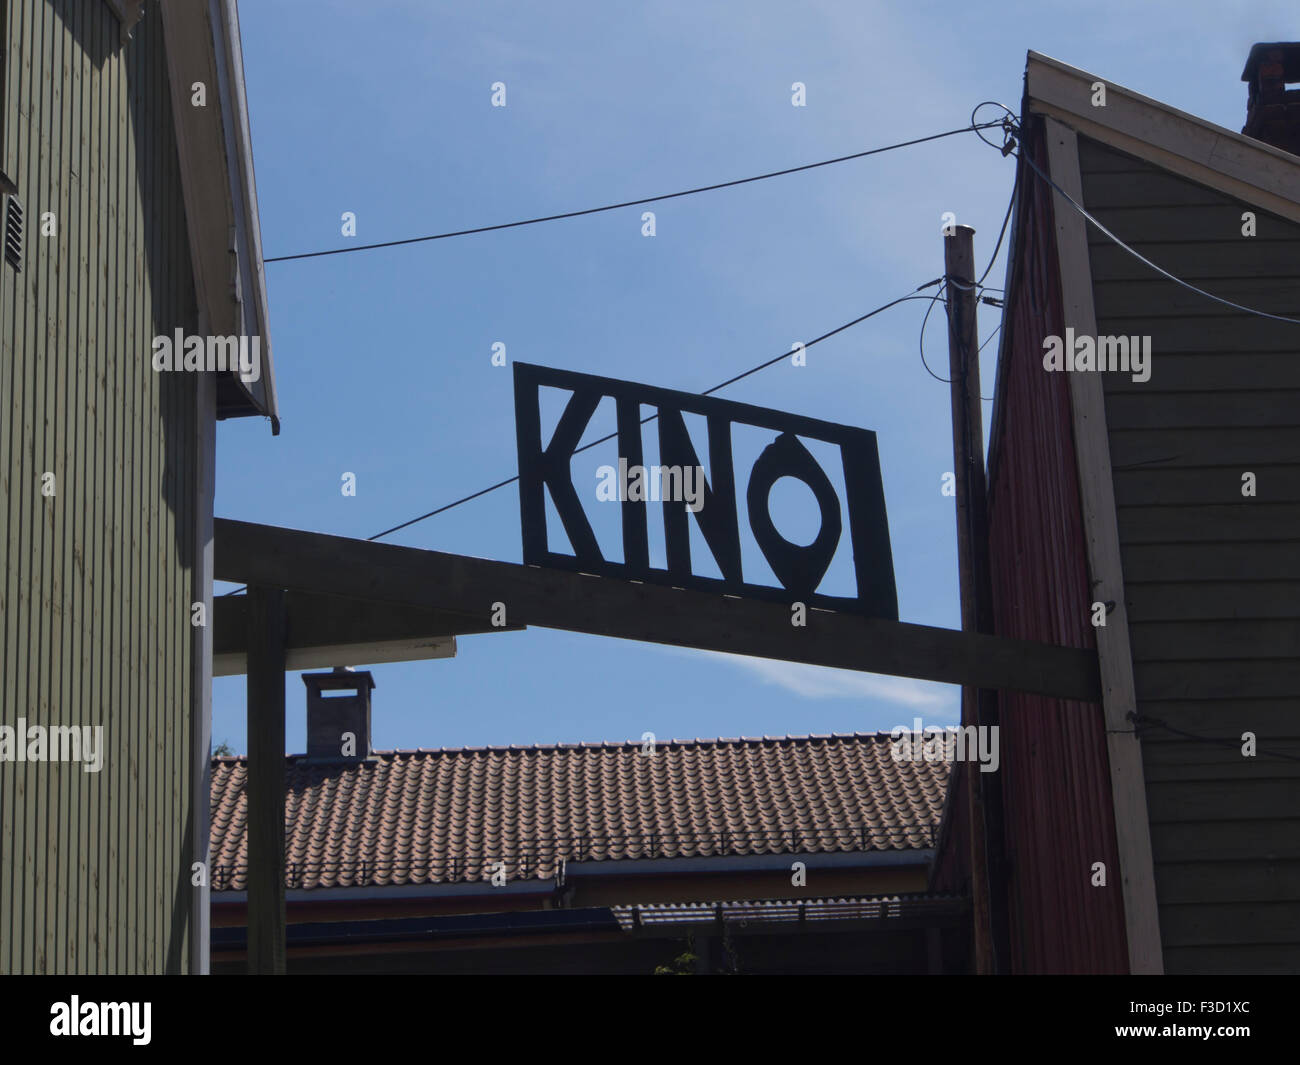 The word kino (cinema) in Norwegian, wooden cut out board silhouetted against the blue sky in Gamlebyen Fredrikstad Norwway Stock Photo